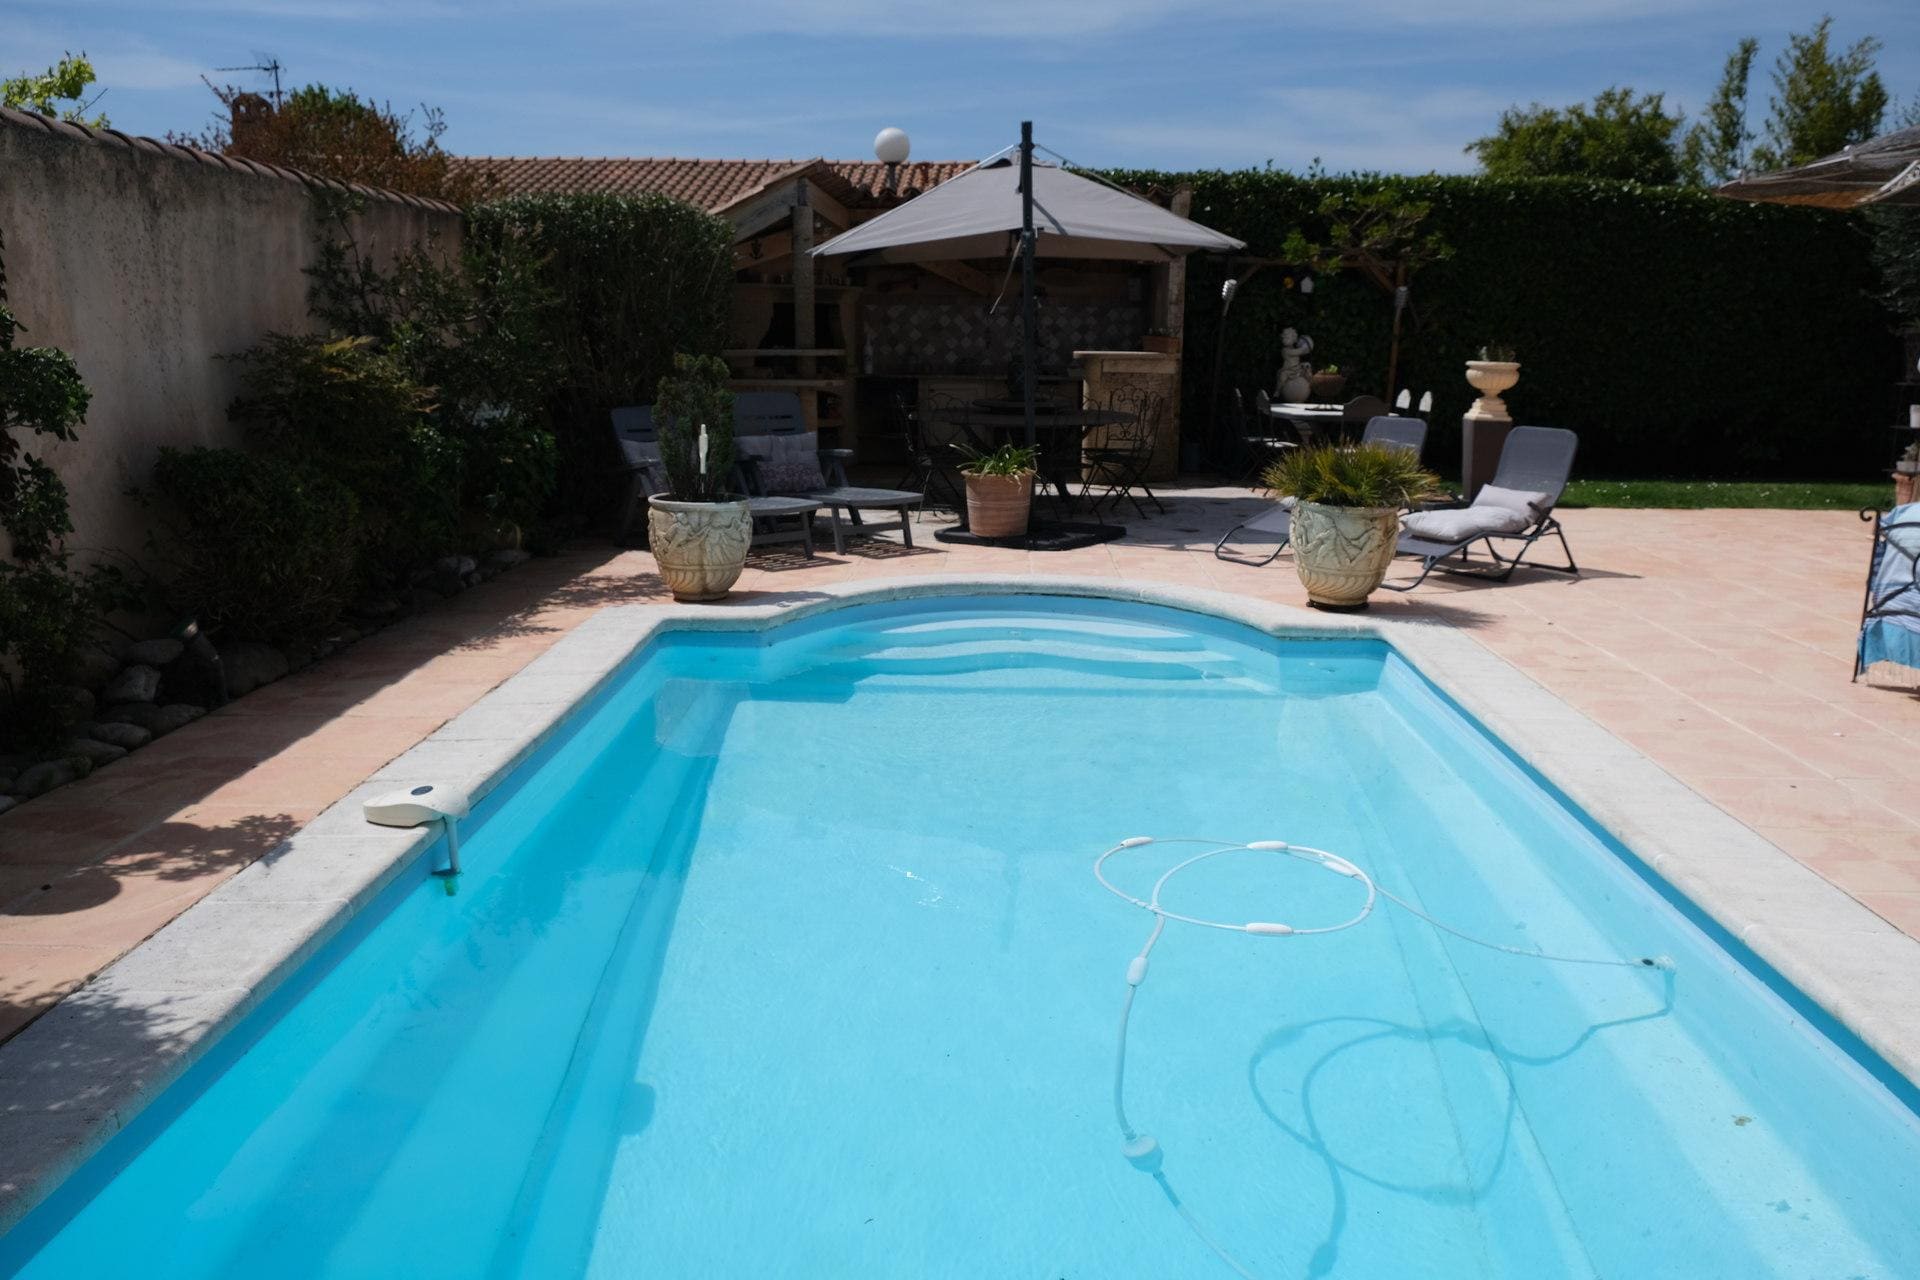 Property Image 2 - pleasant home with private pool and pool house - close to aix en provence, accommodates 4 people.